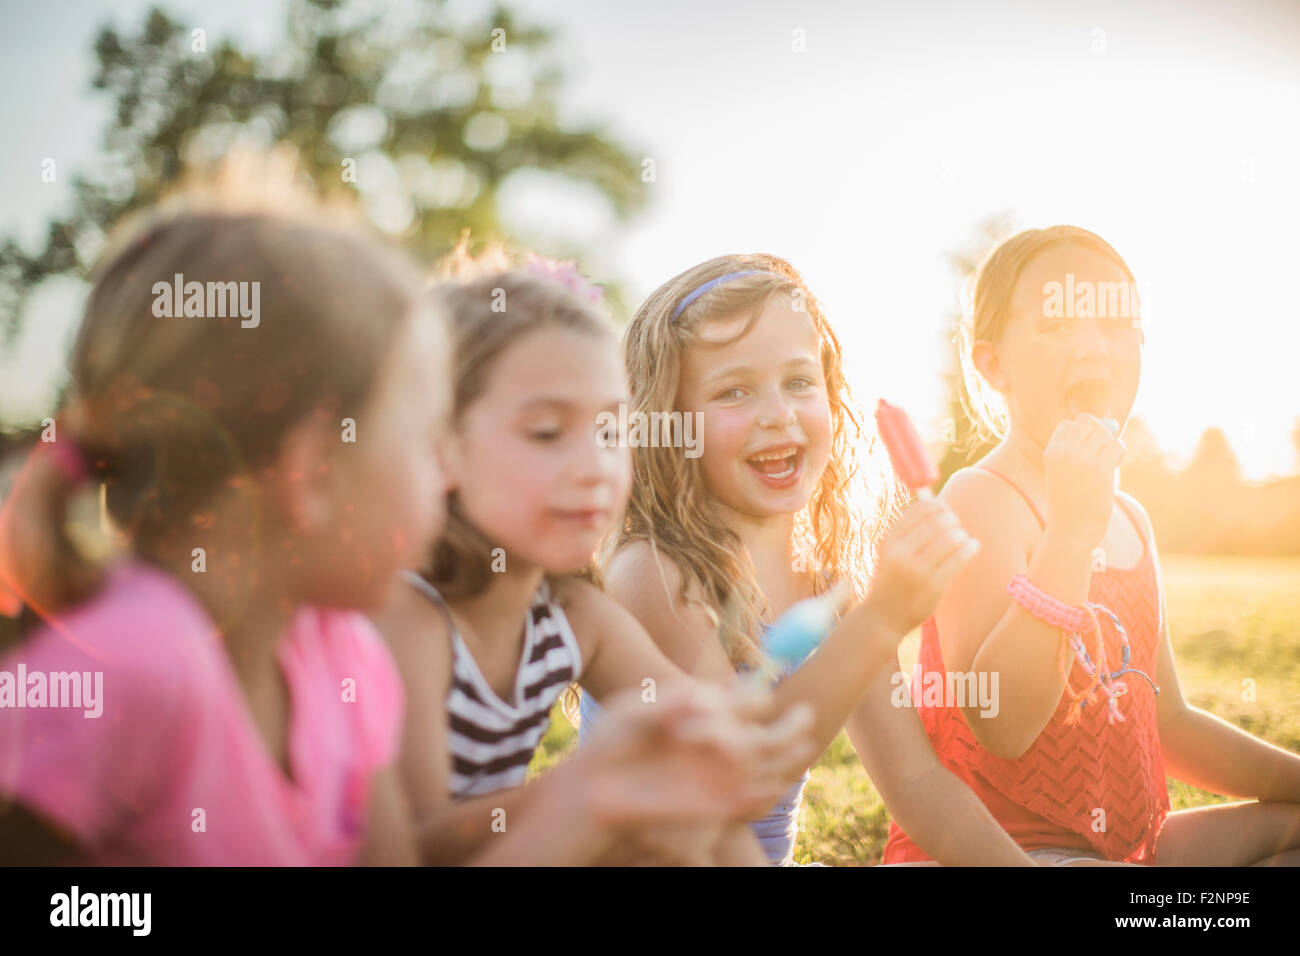 Girls eating flavored ice in sunny field Stock Photo